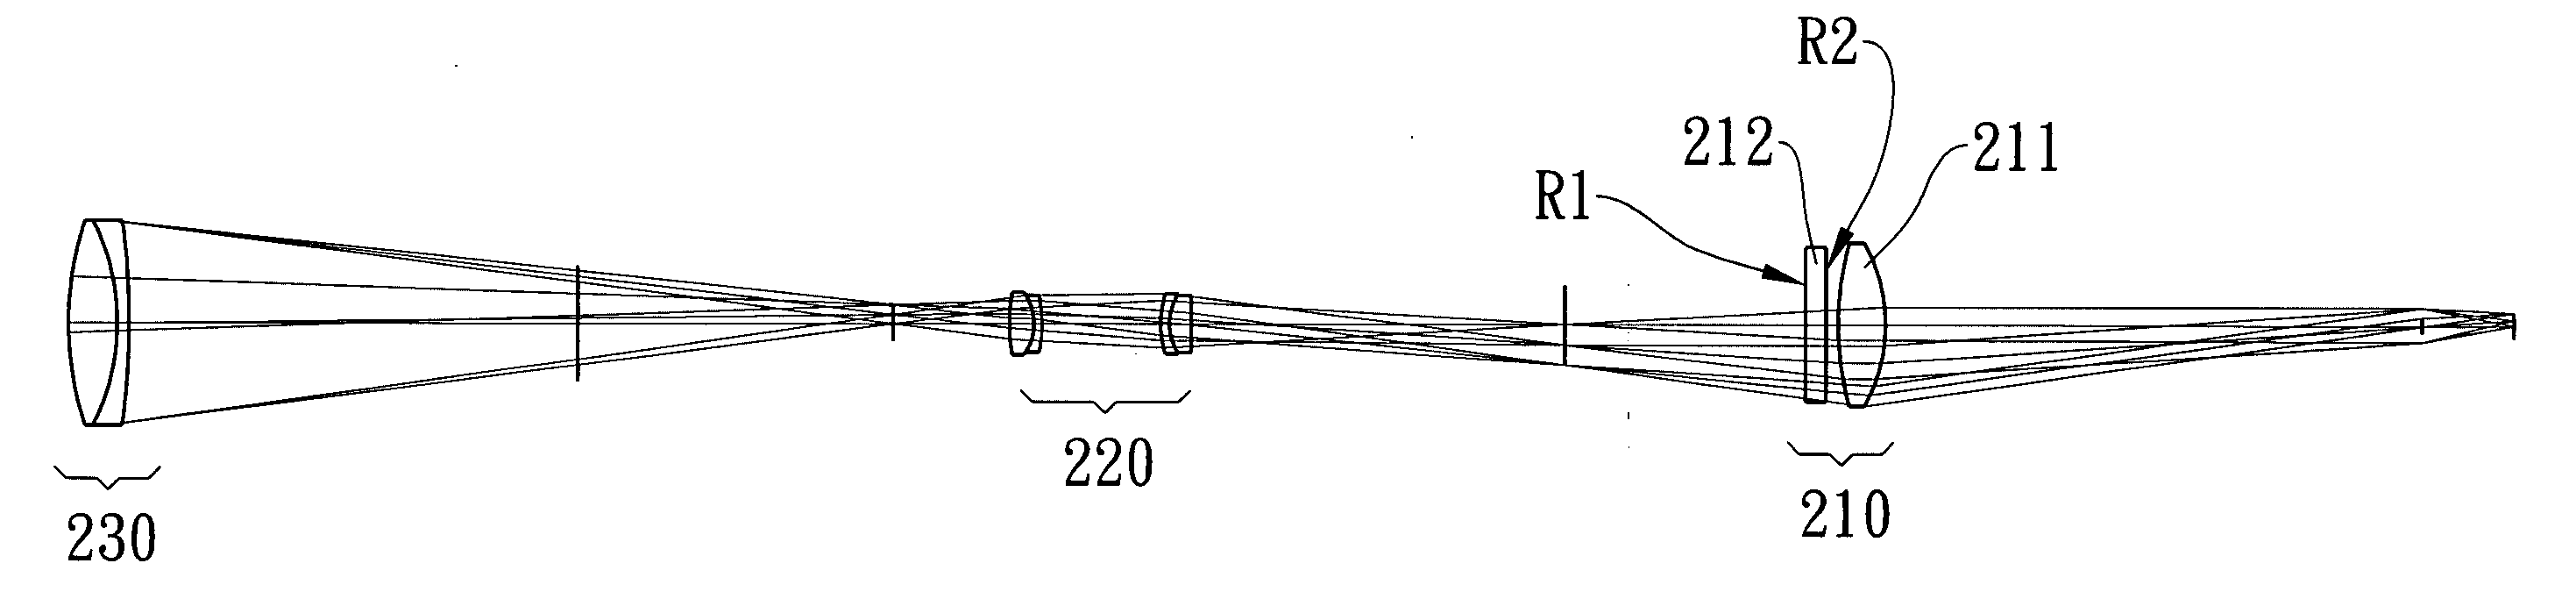 Eyepiece lens group of a riflescope system